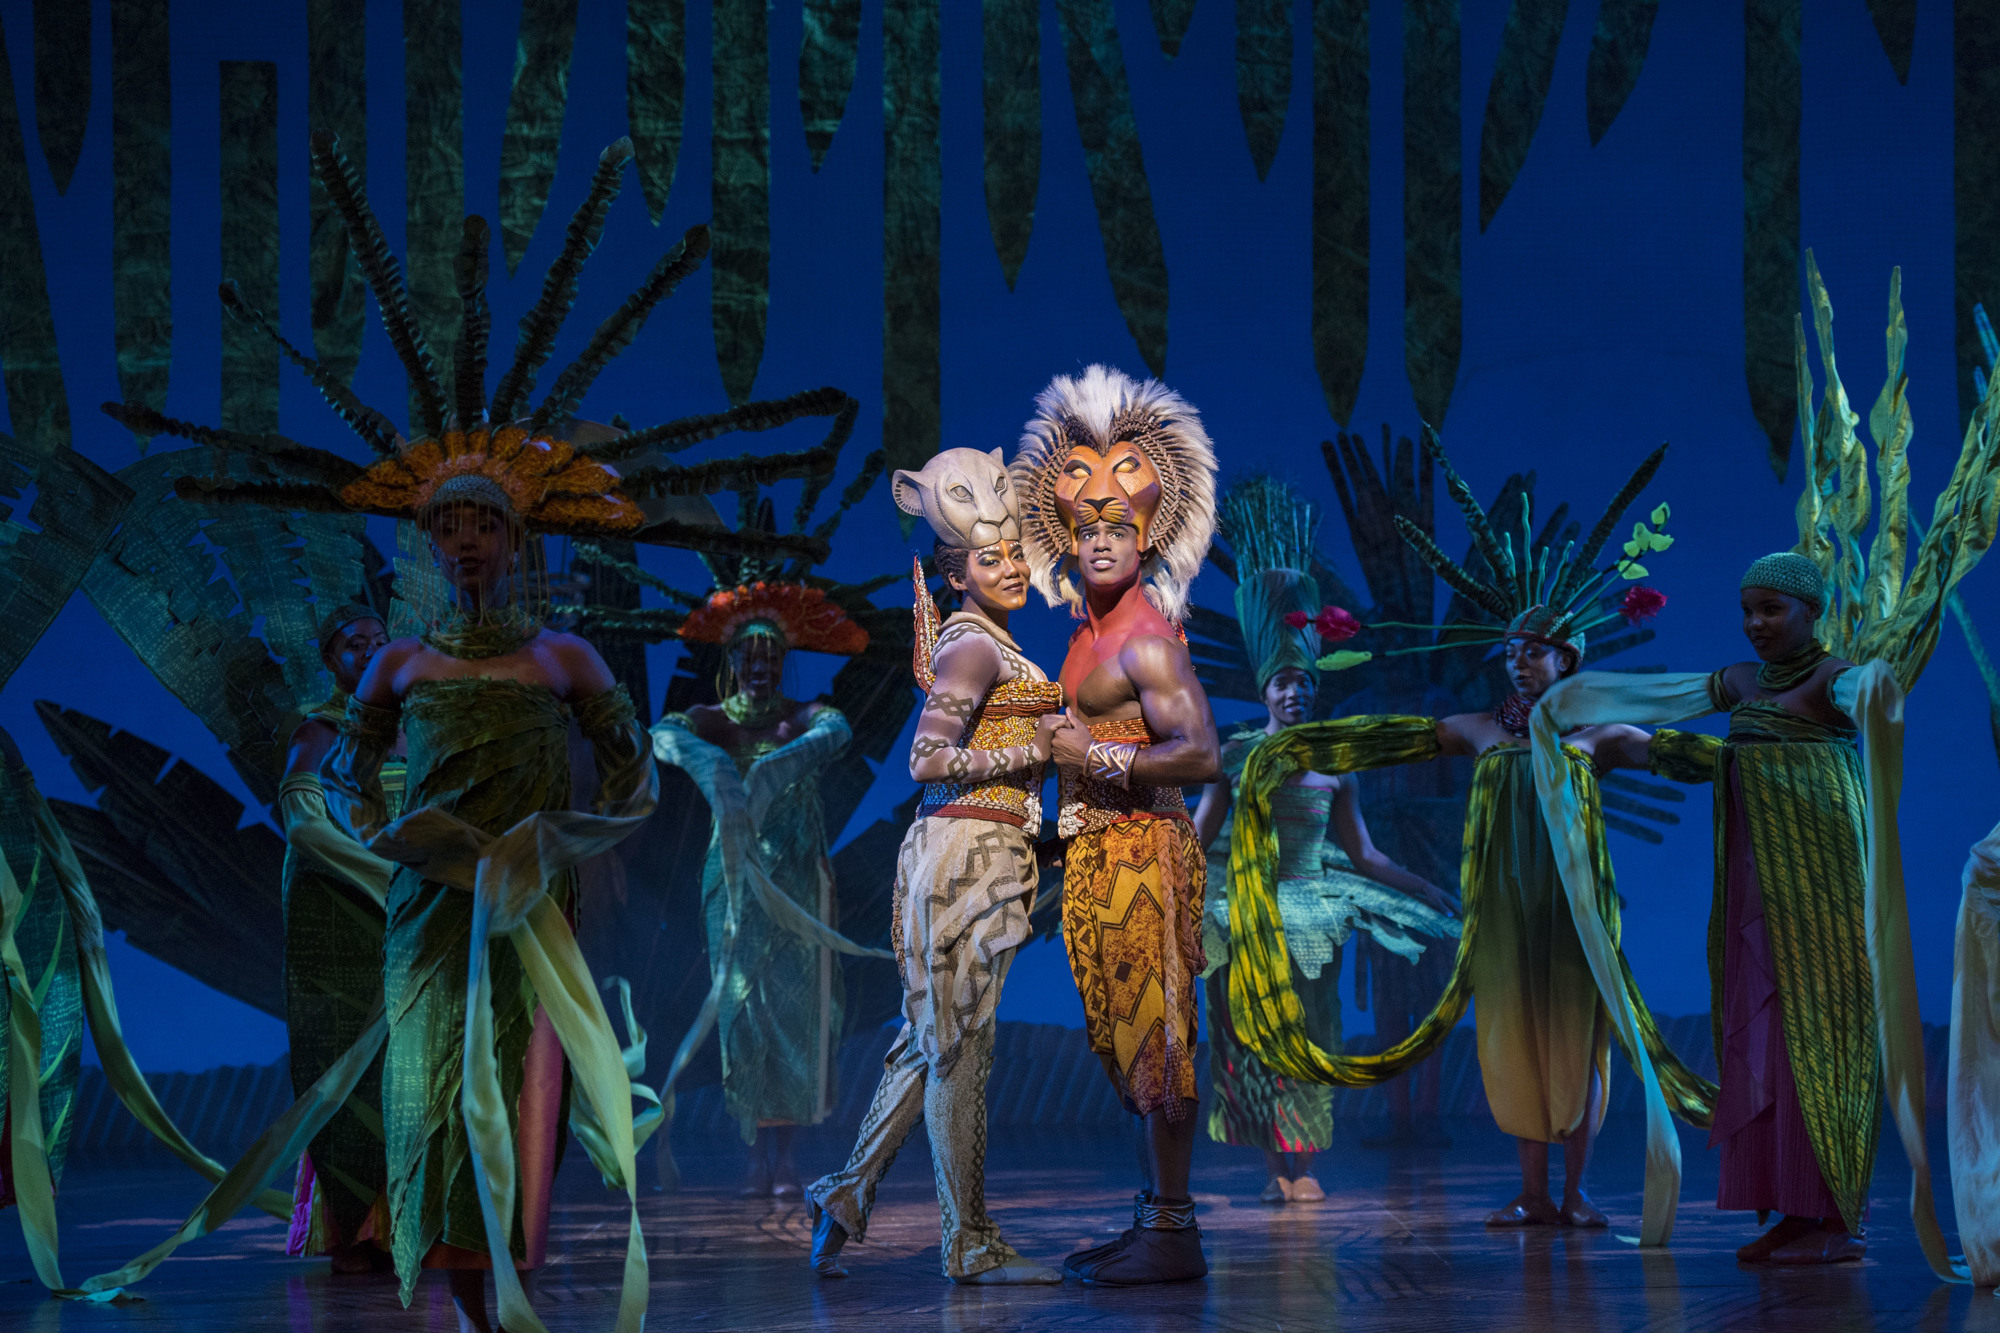 Nia Holloway and Jared Dixon perform as Nala and Simba in Disney's touring production of 